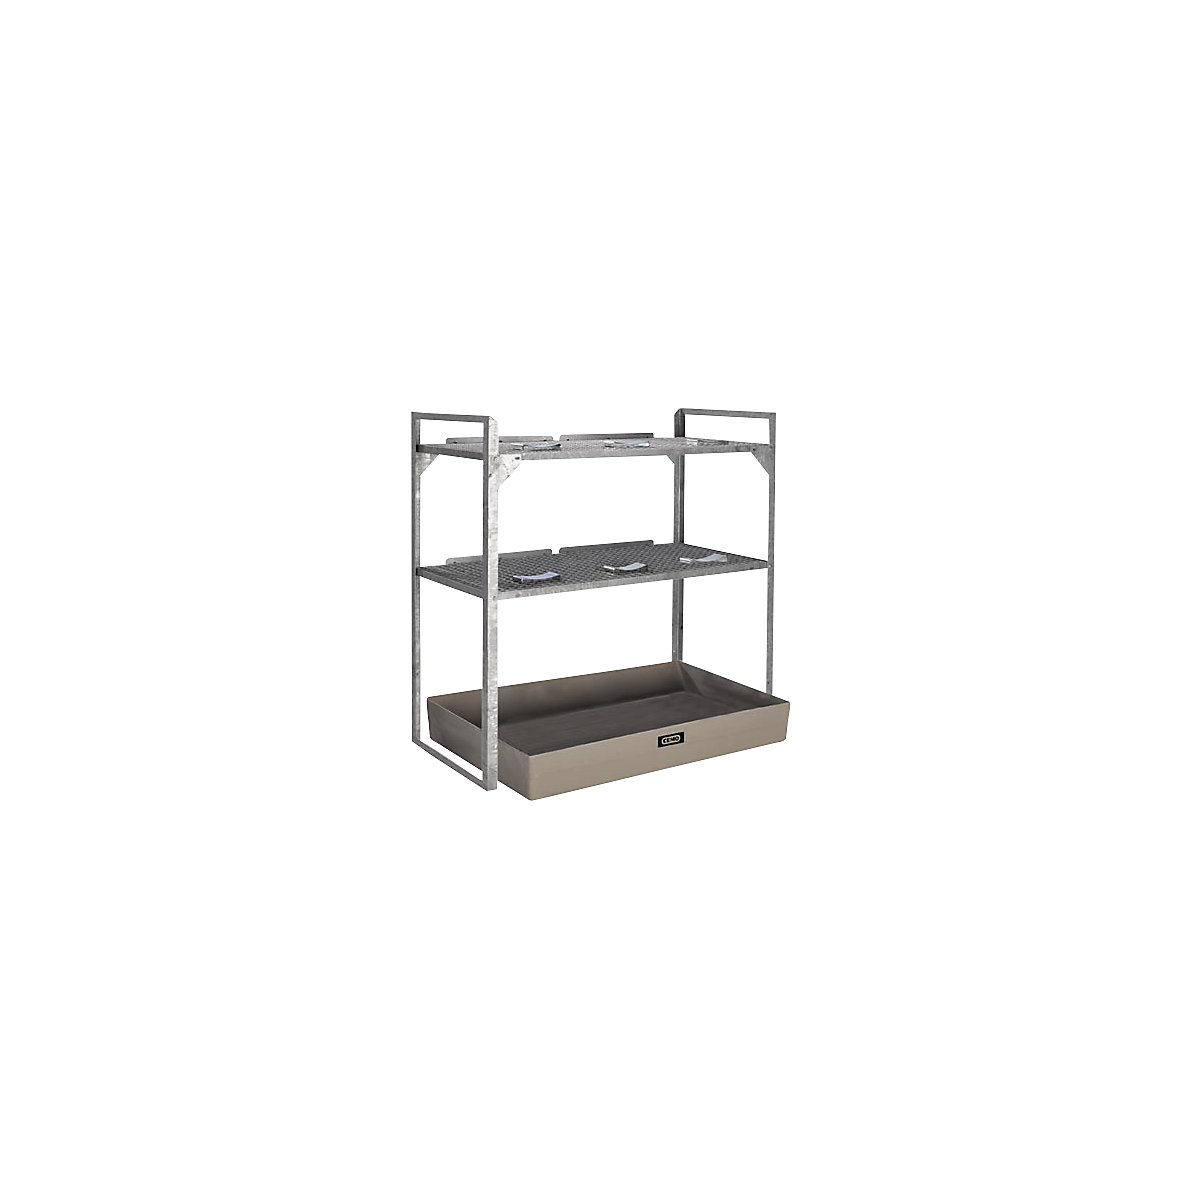 Drum and small container shelf unit - CEMO